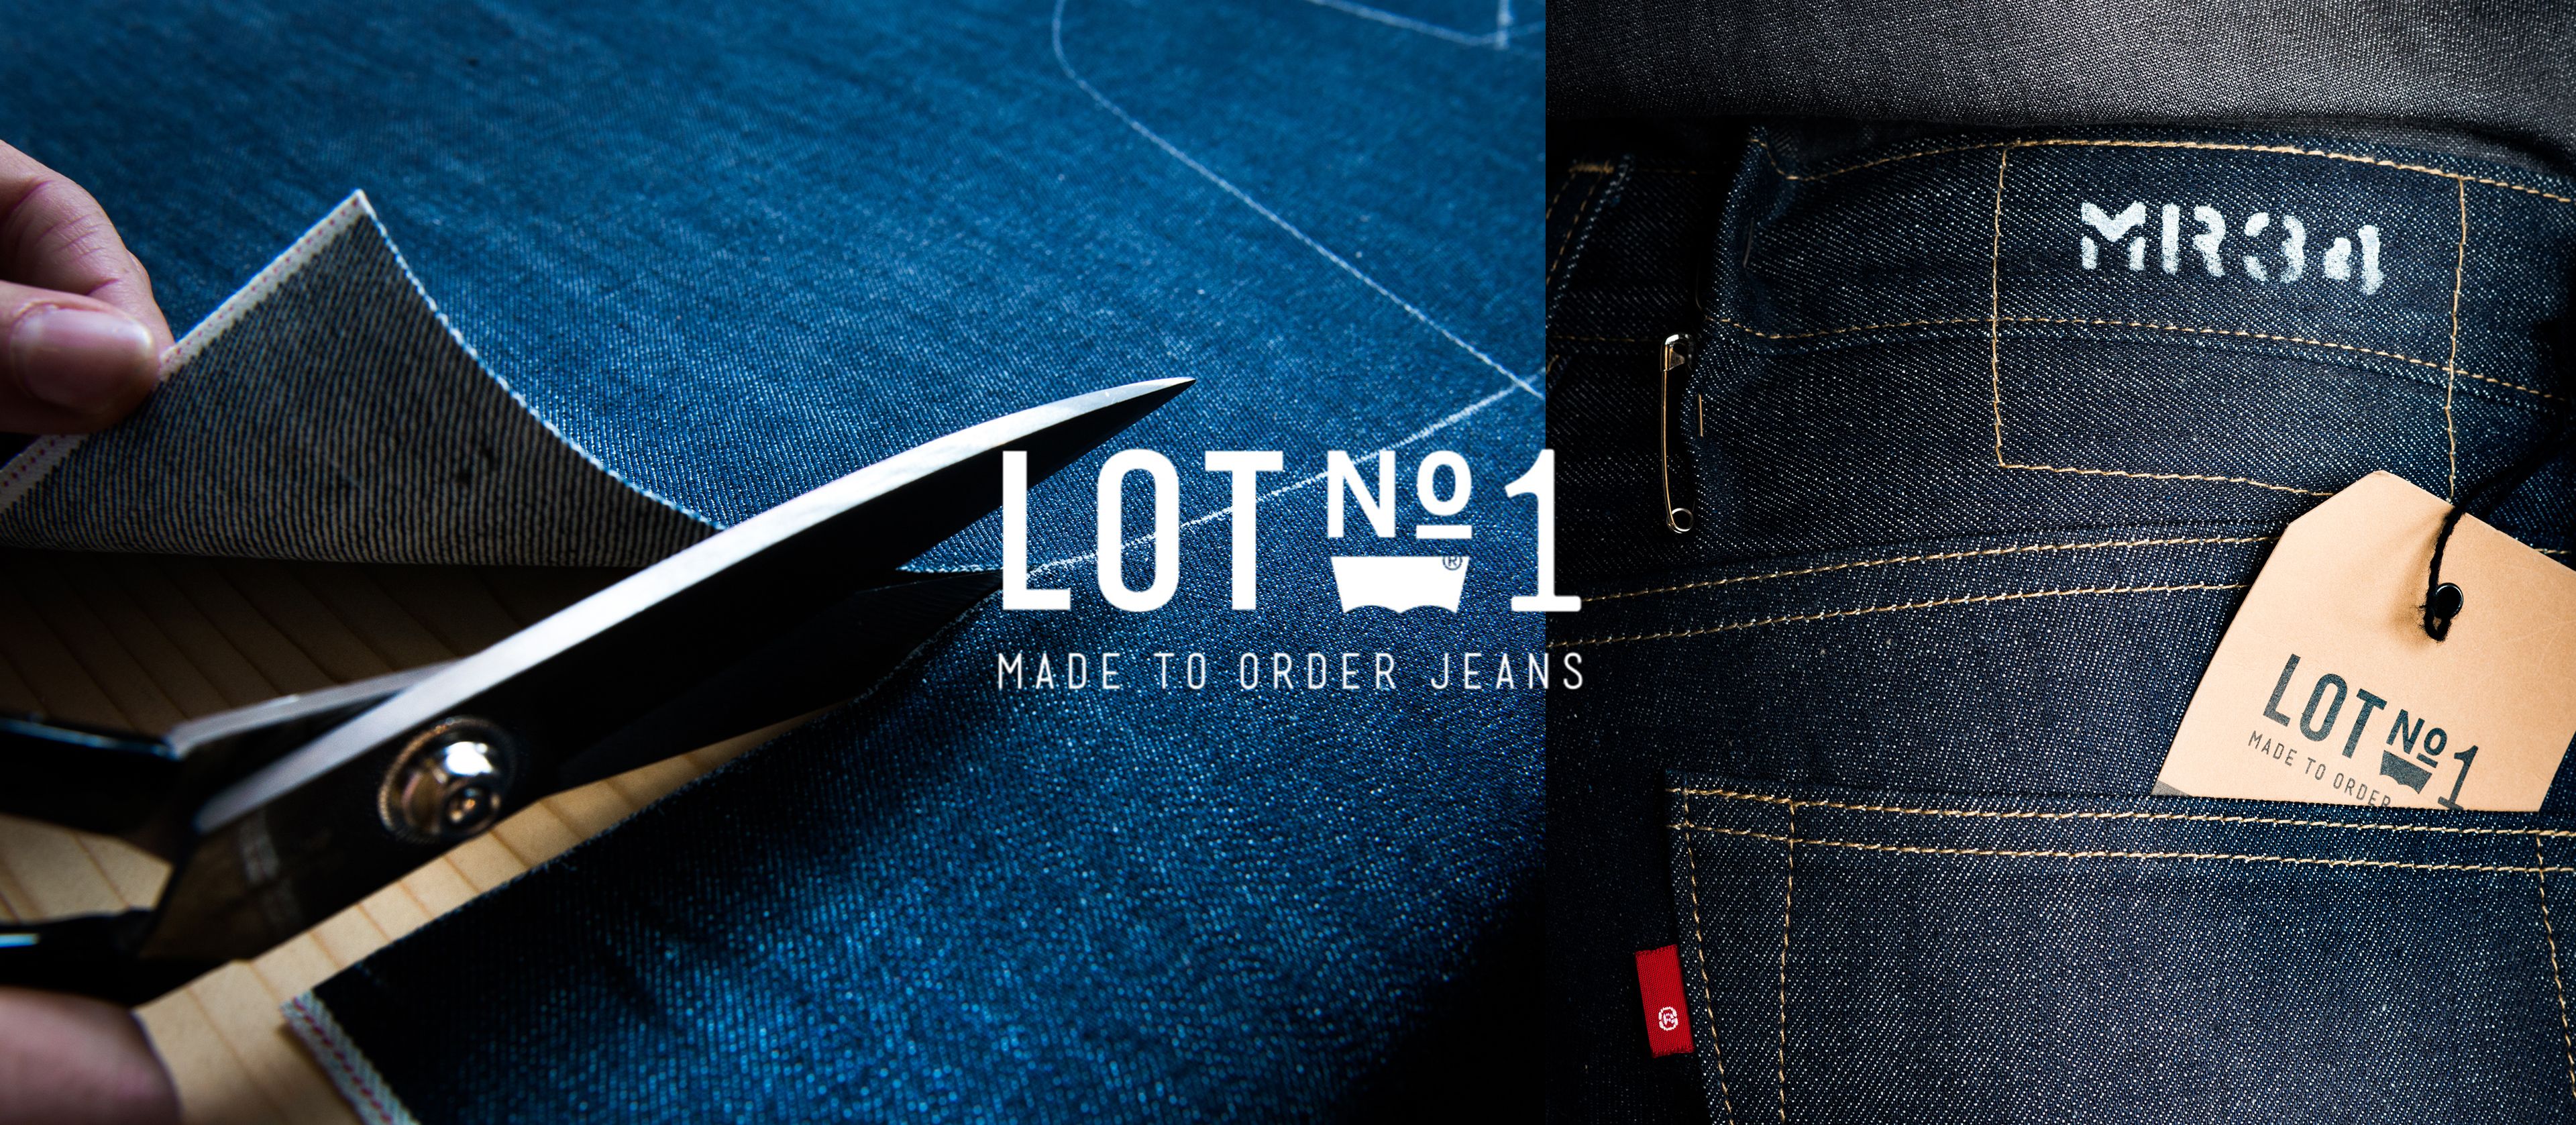 jeans made to order